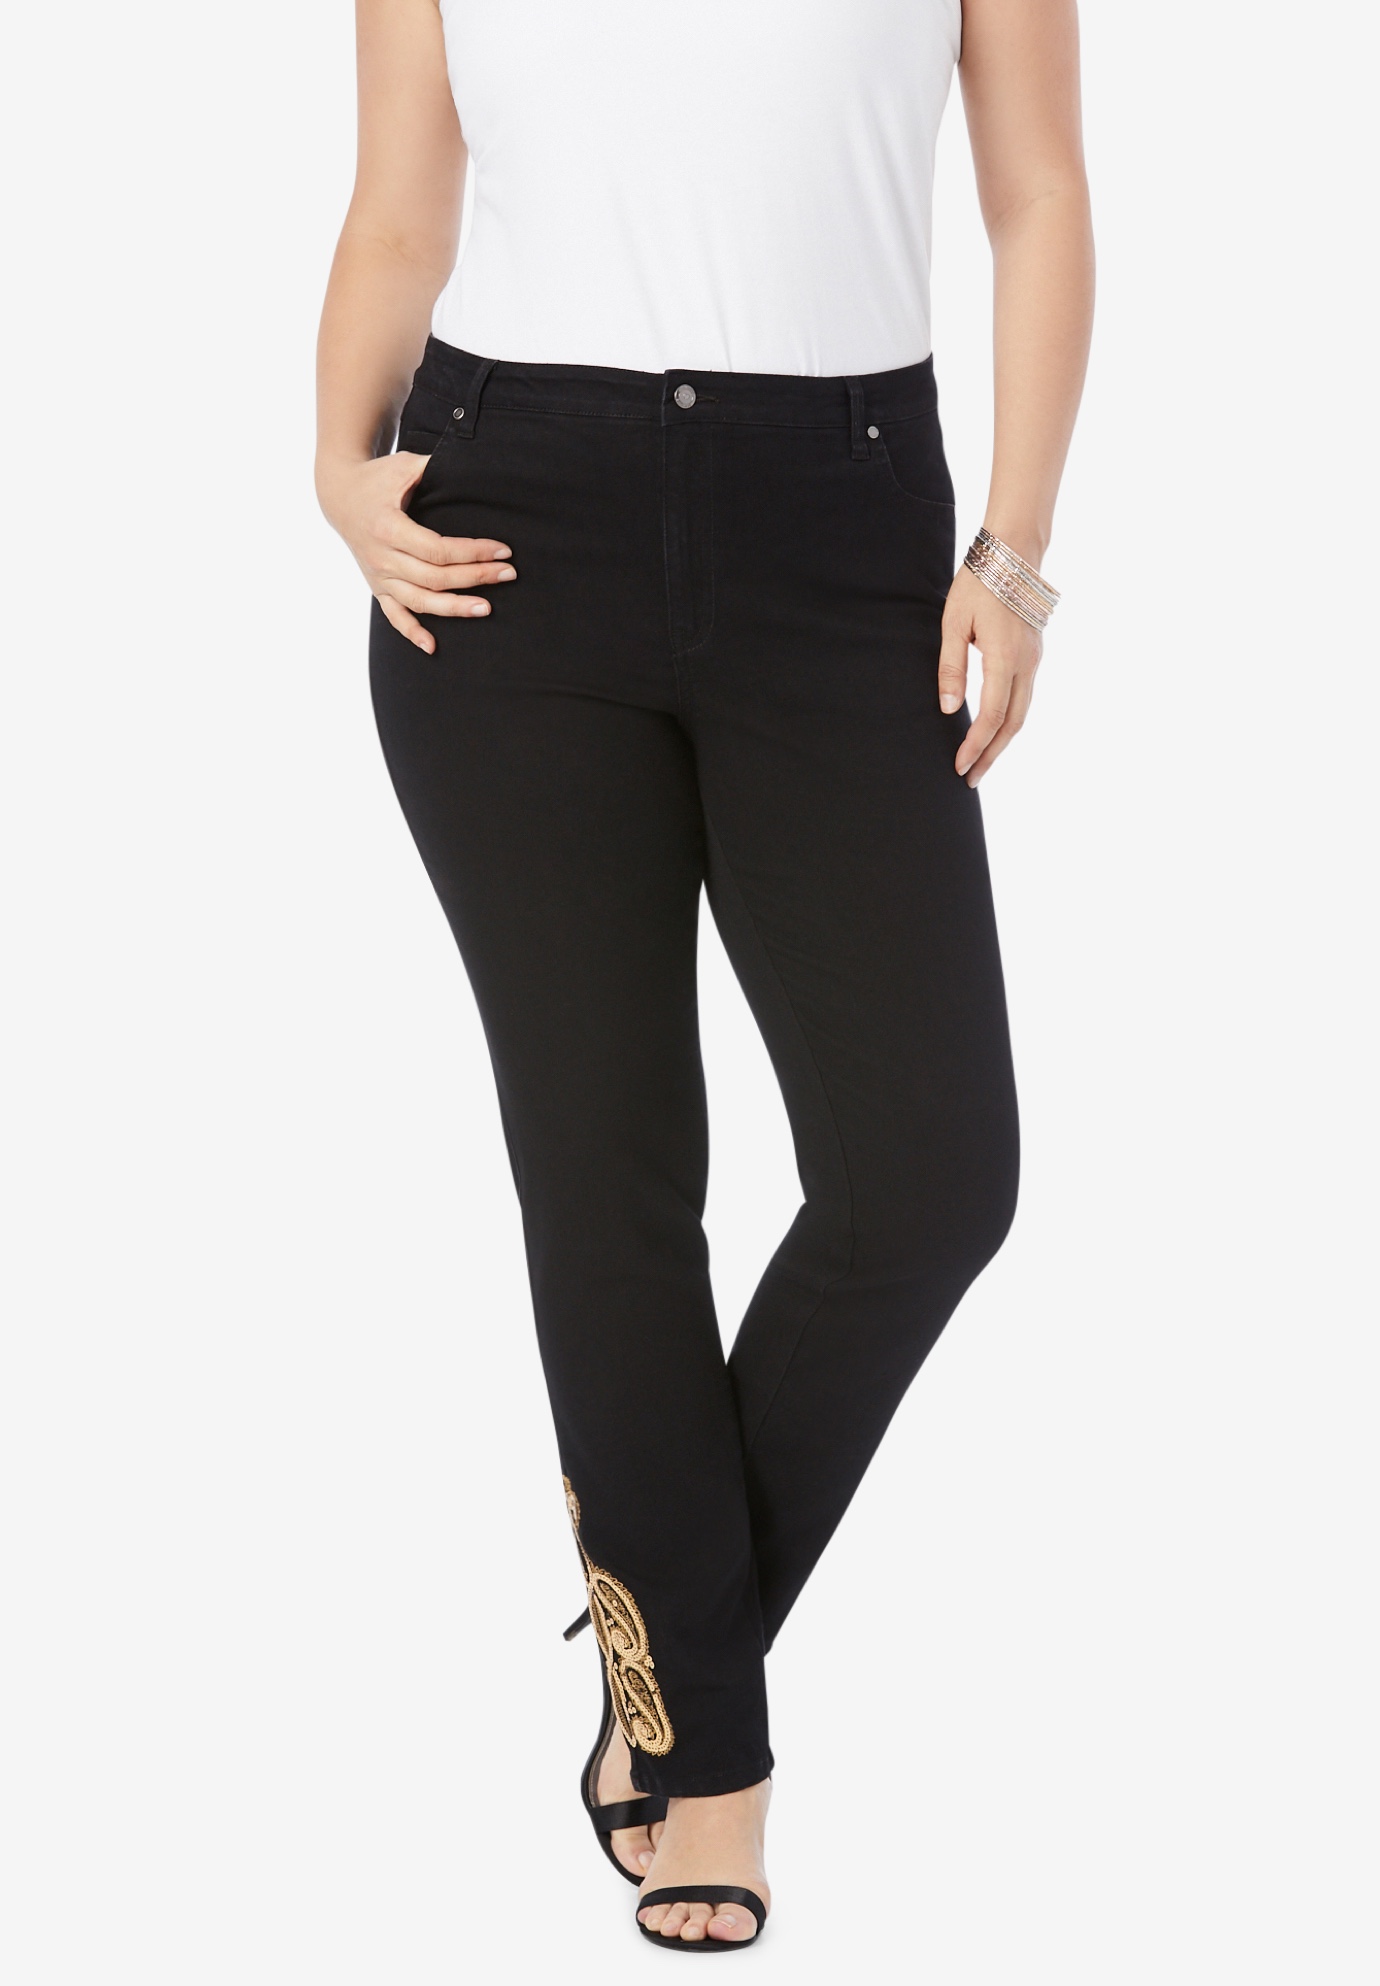 embroidered straight leg jeans